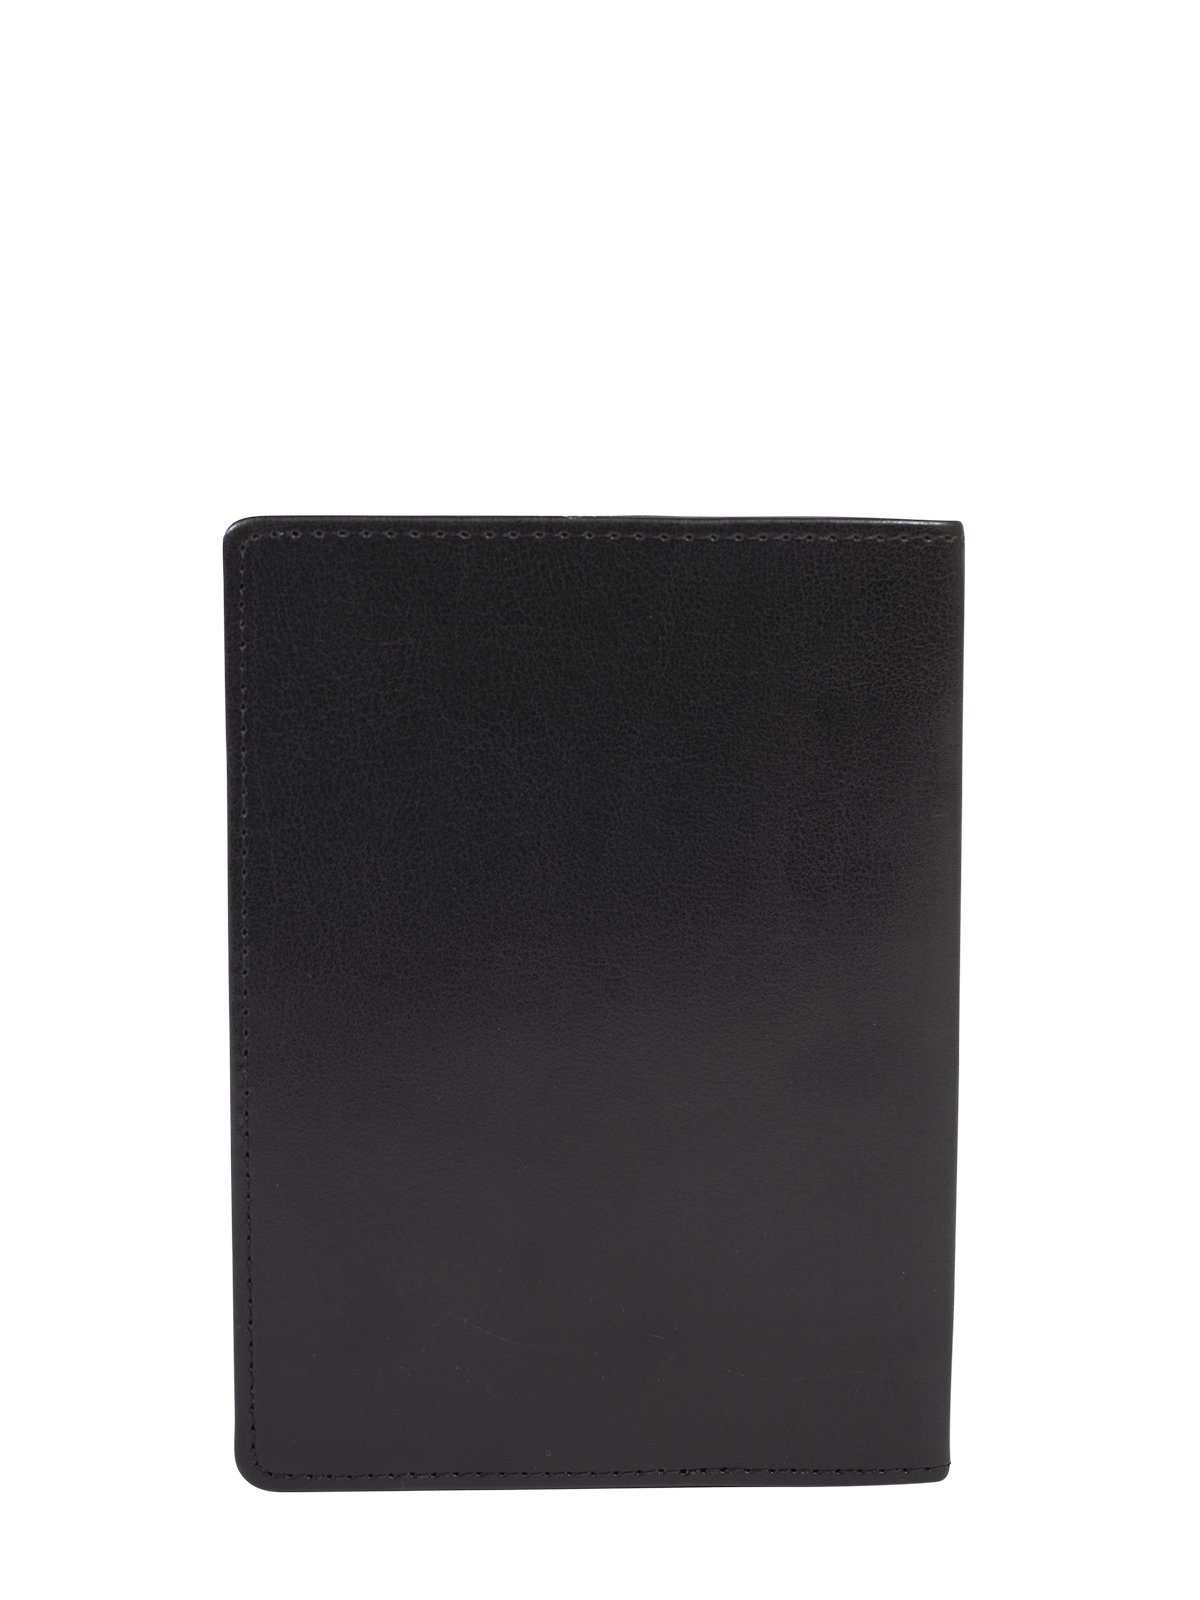 Austin House Passport Case With RFID Protection